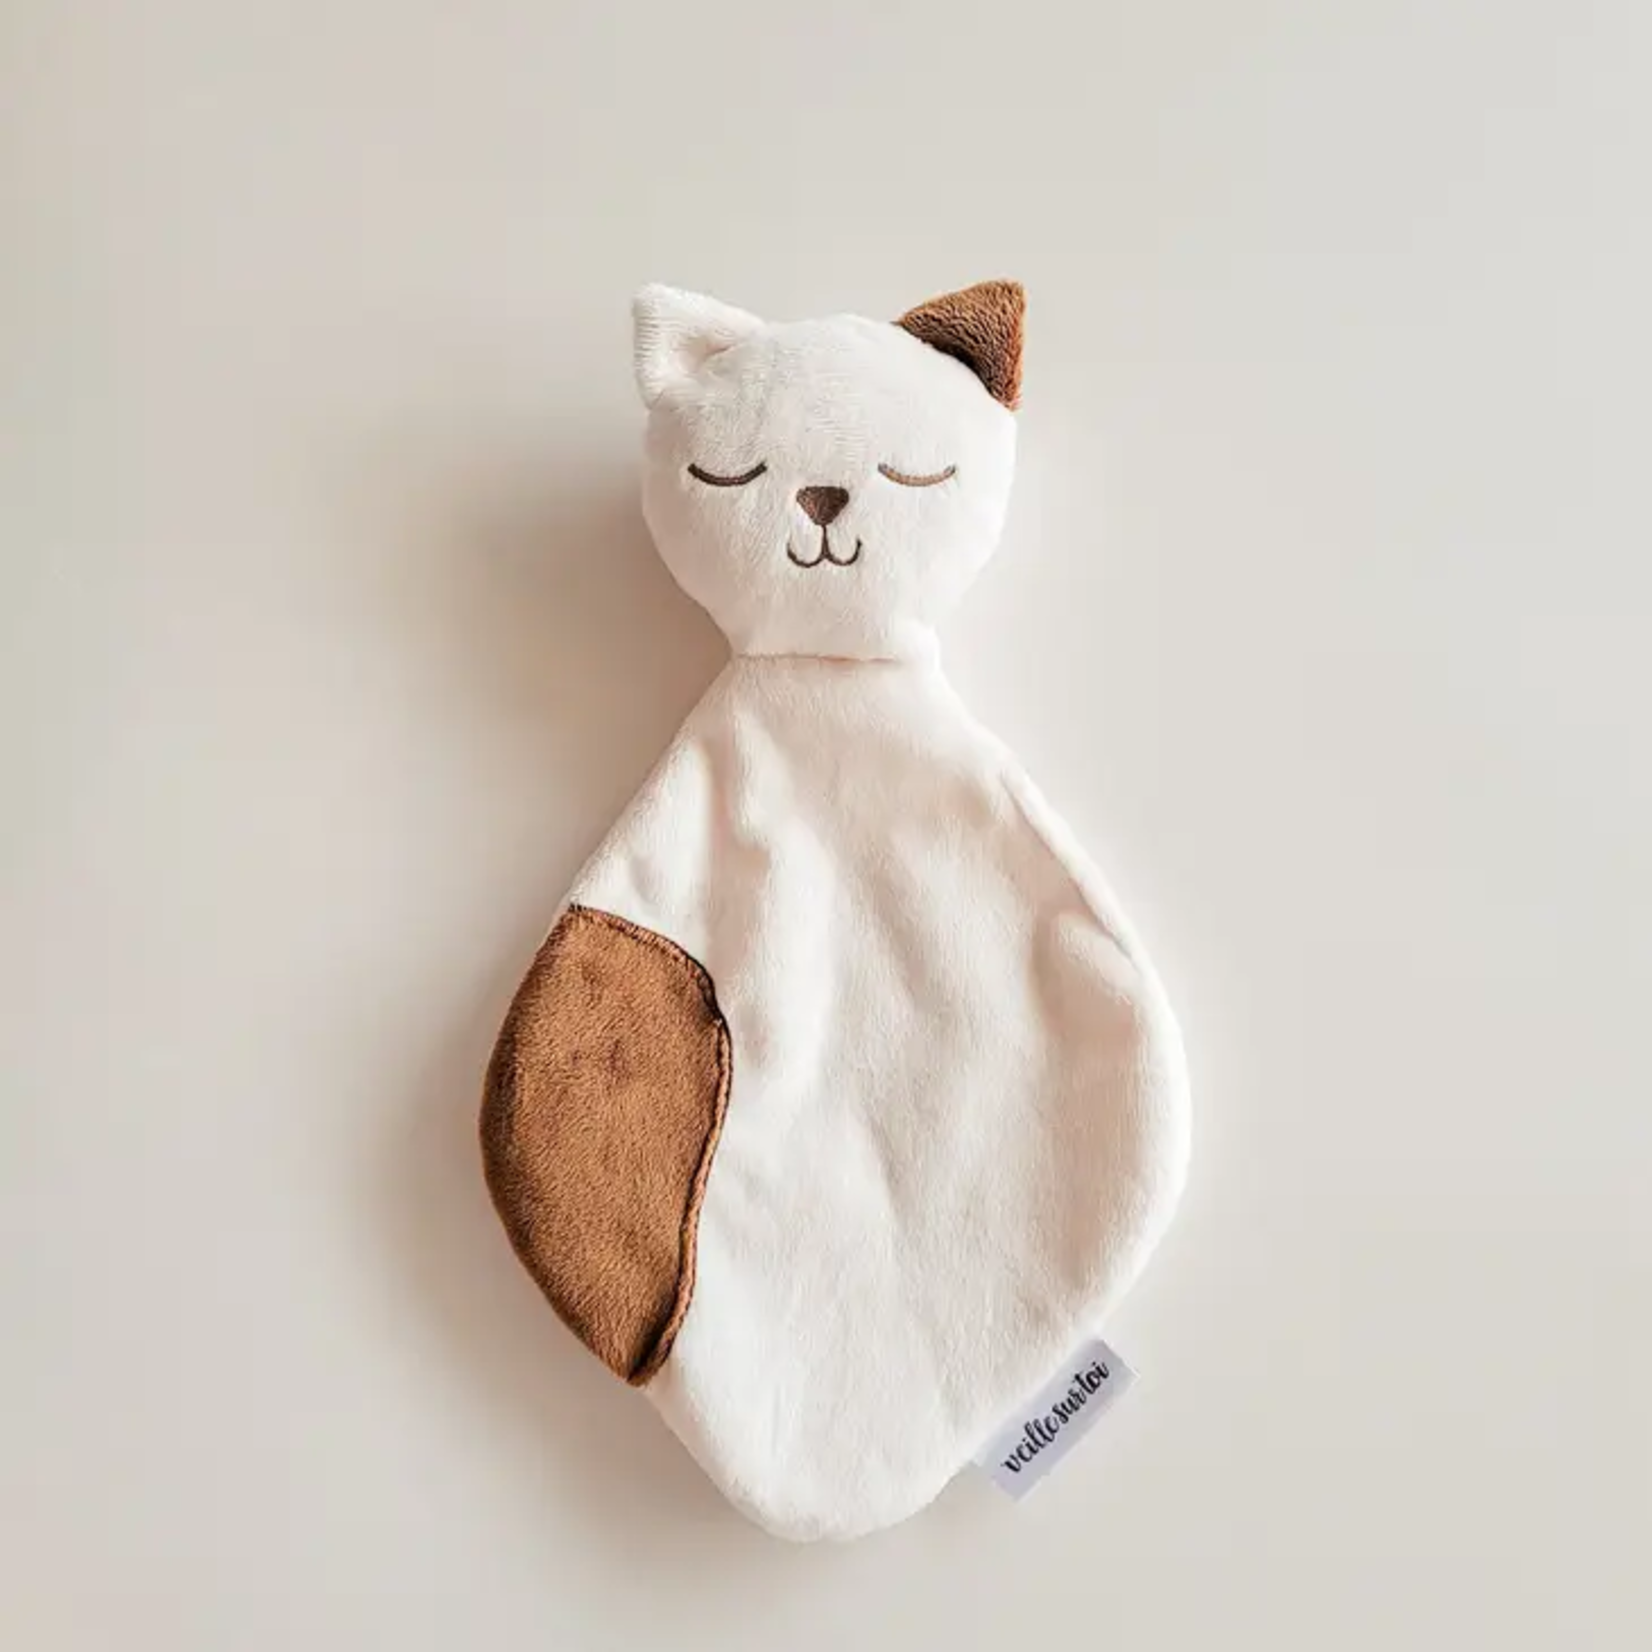 Spotted Cat Cuddly Toy - Security Blanket